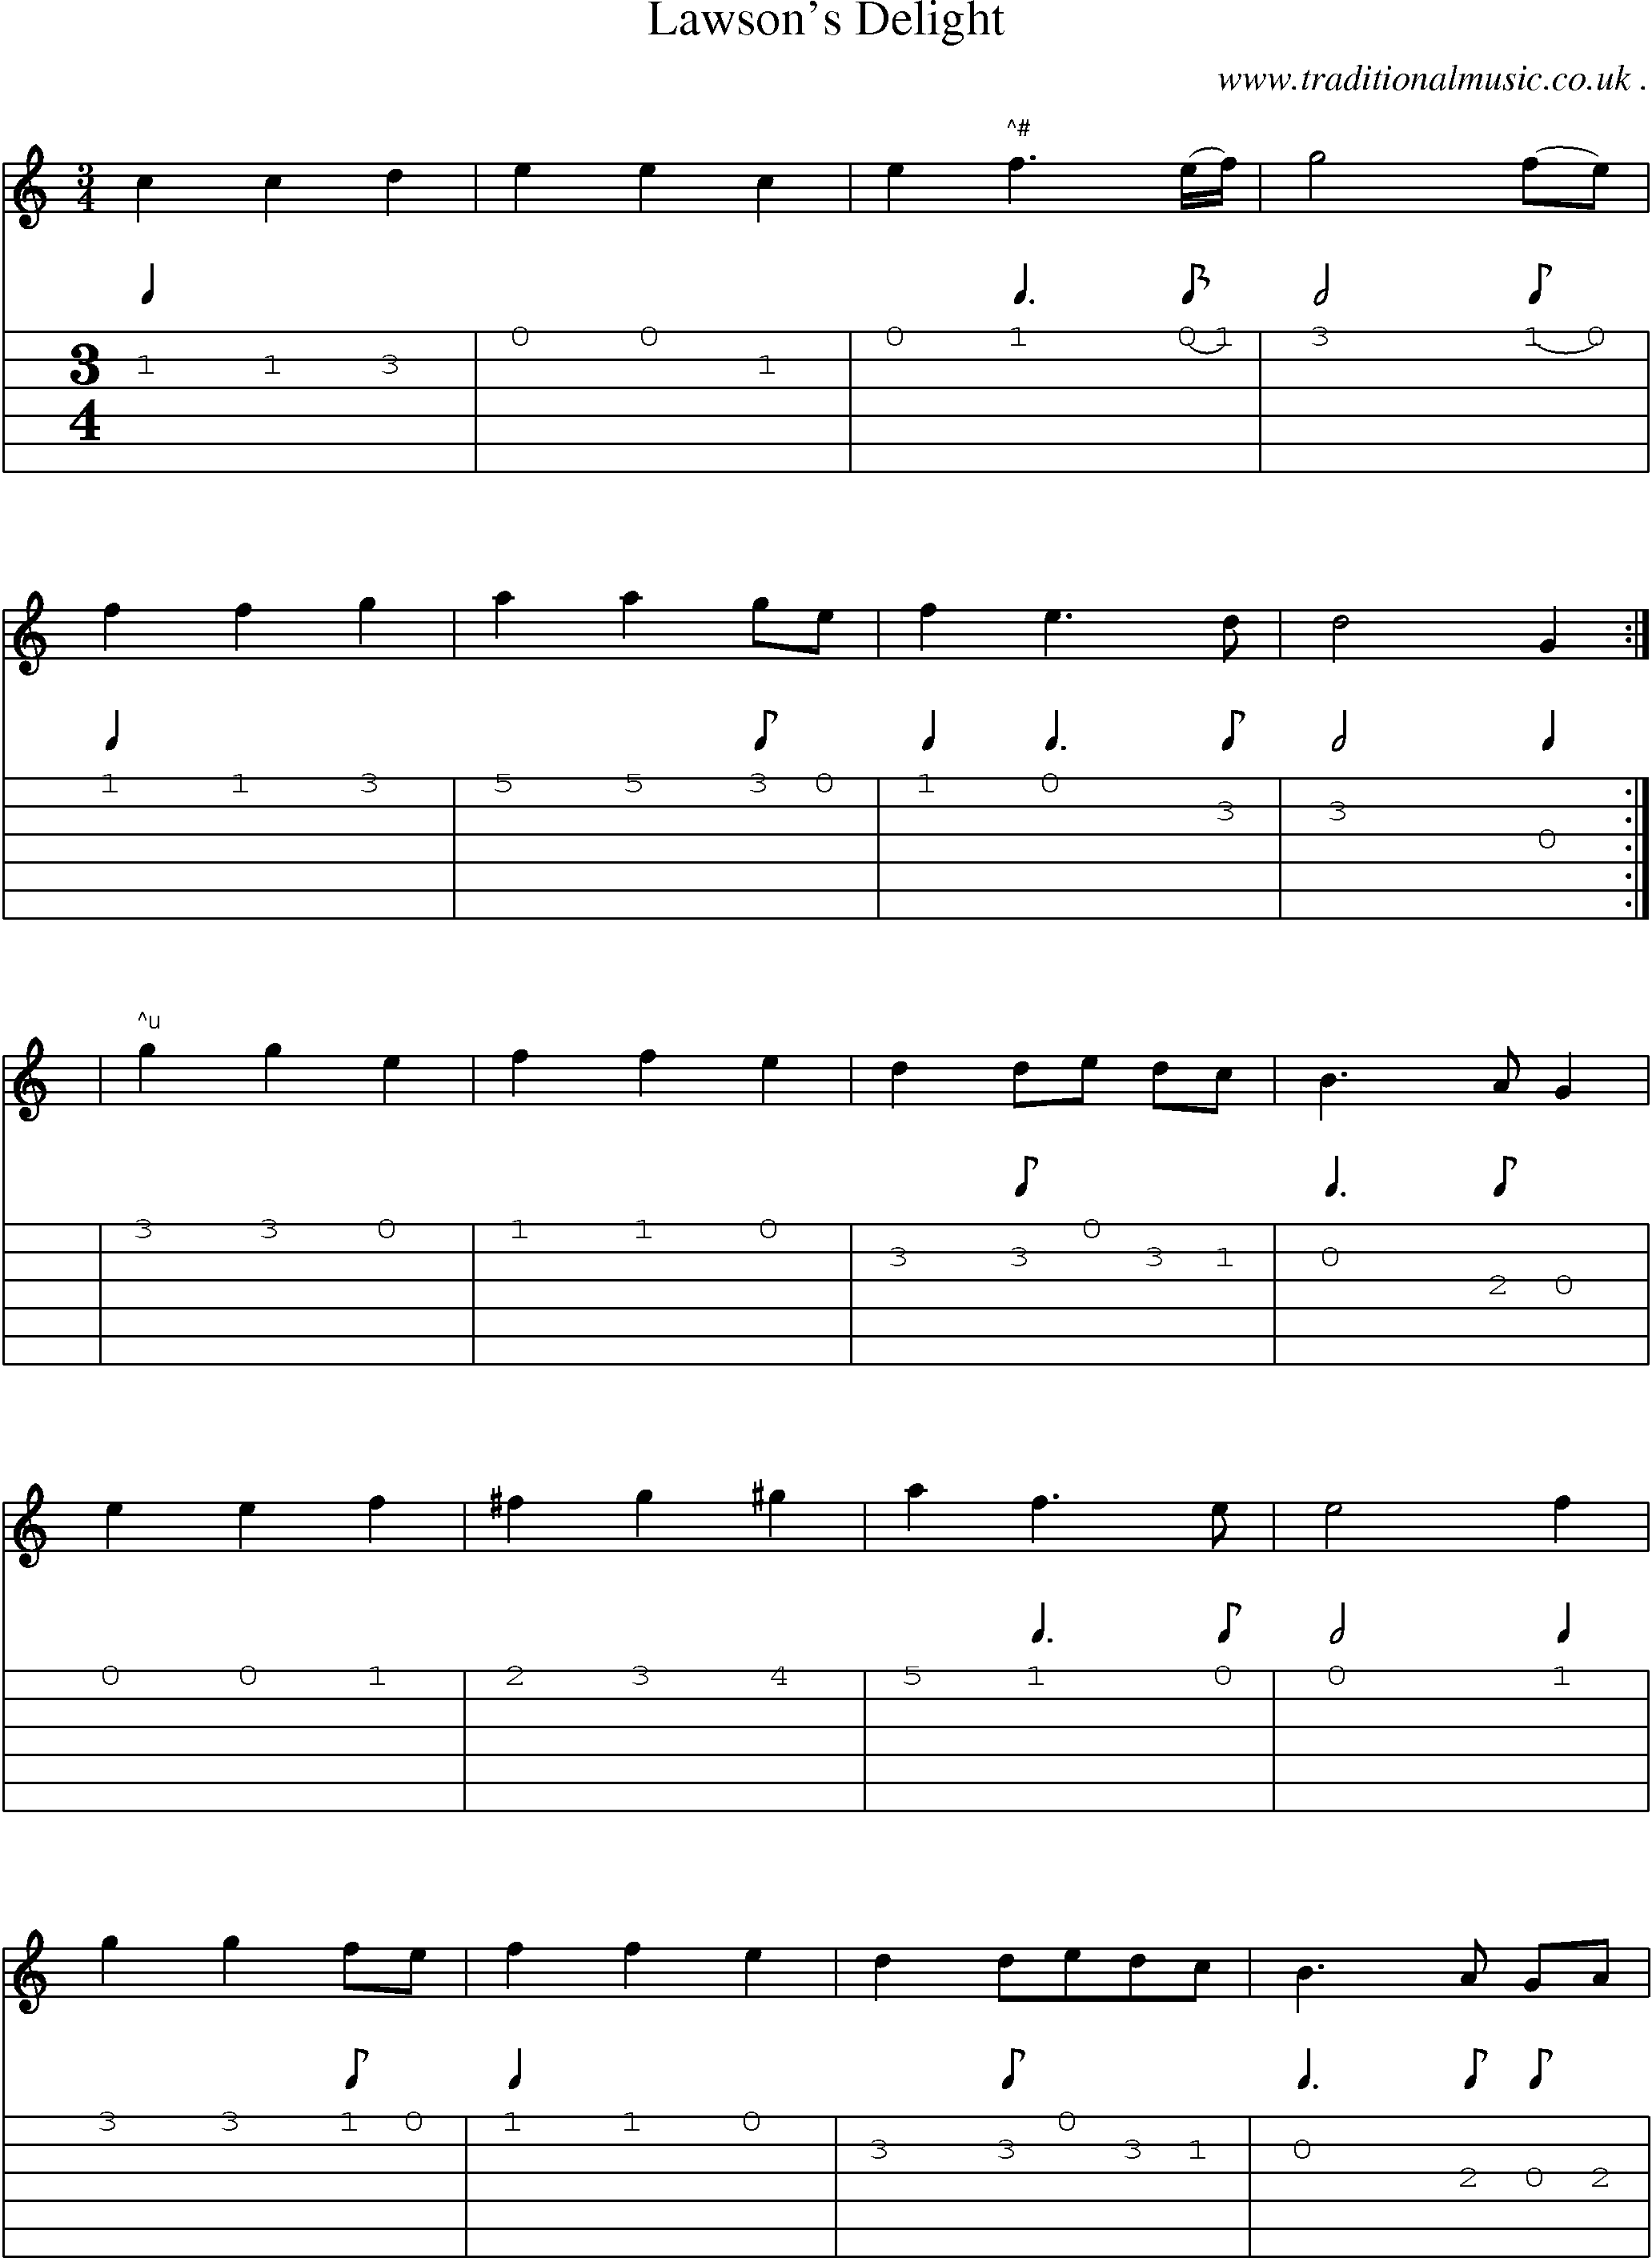 Sheet-Music and Guitar Tabs for Lawsons Delight